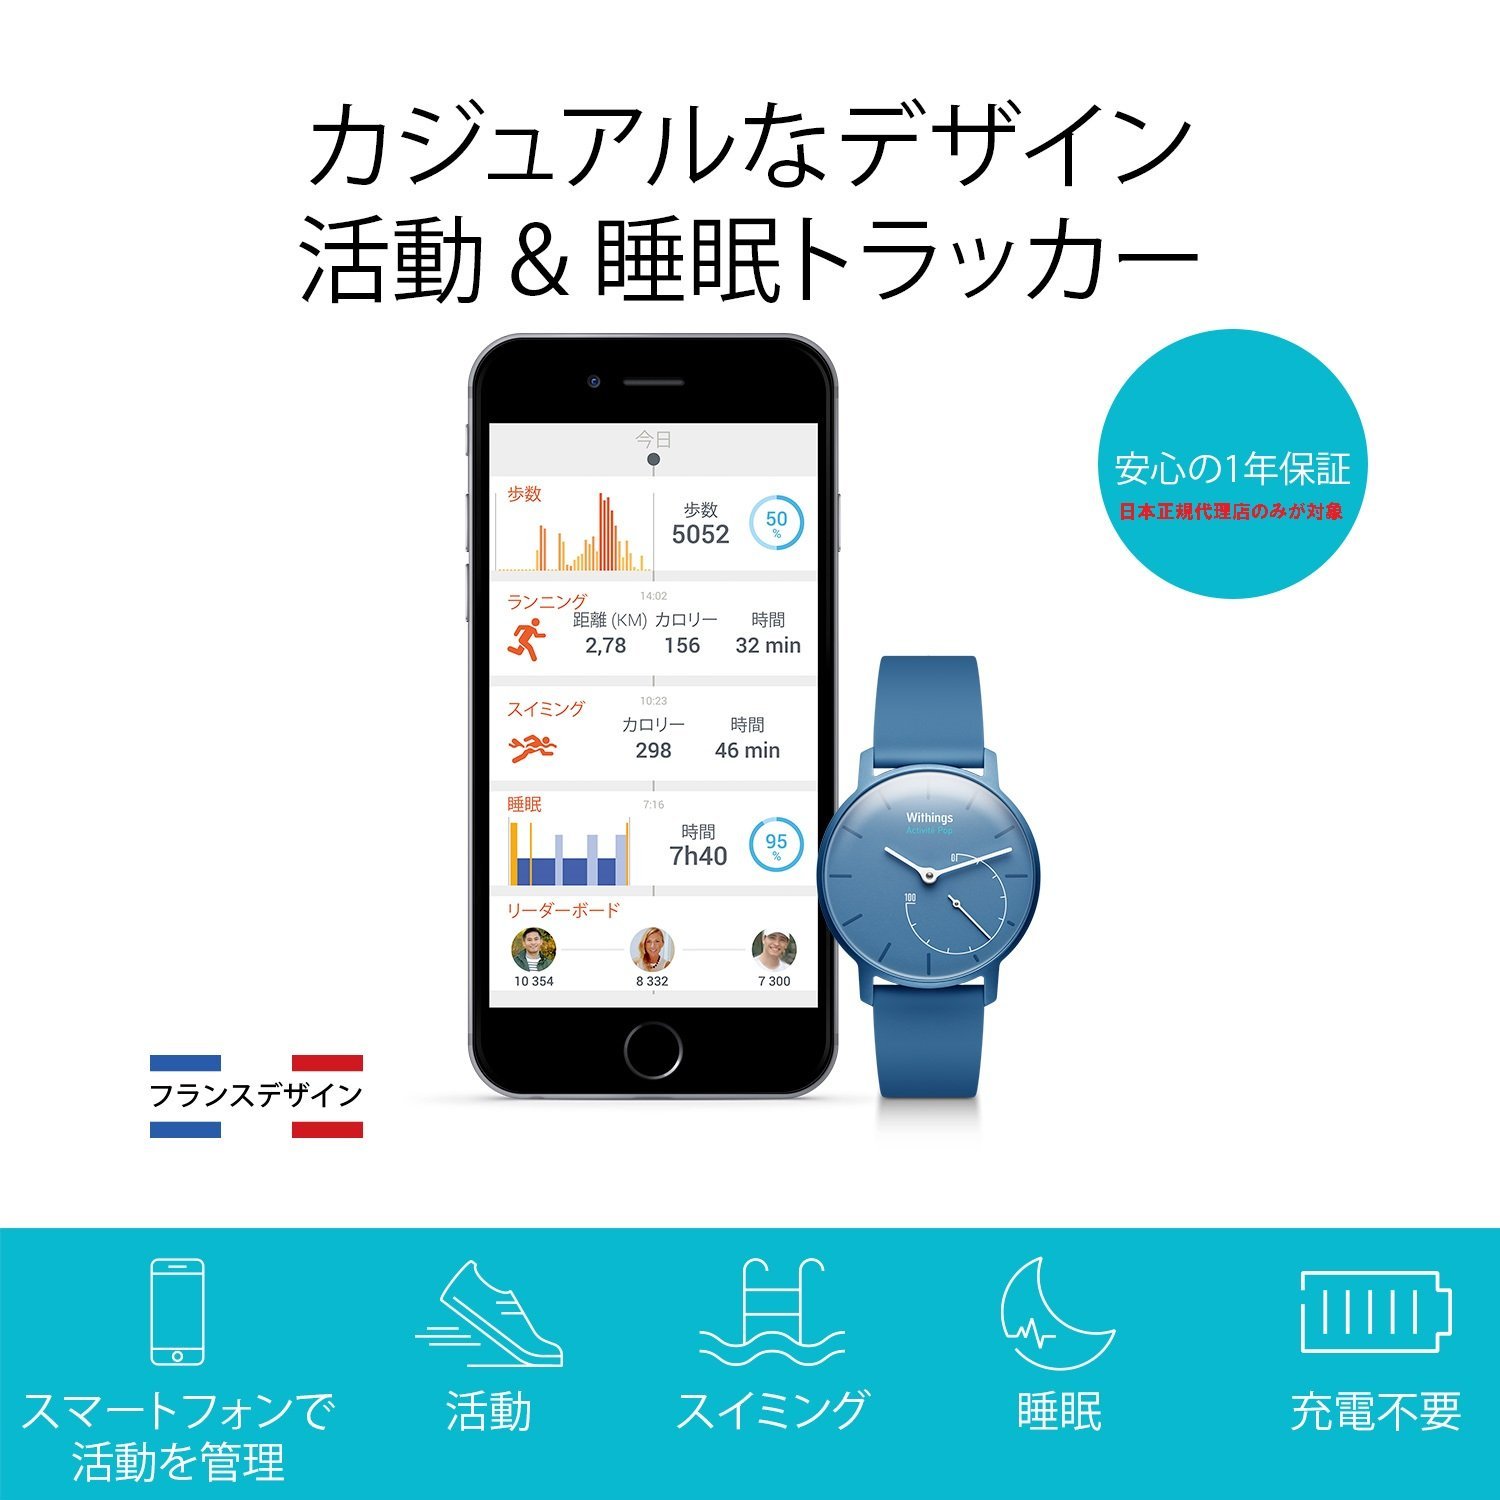 Withings  Activité Pop Bright Azure 智能手表